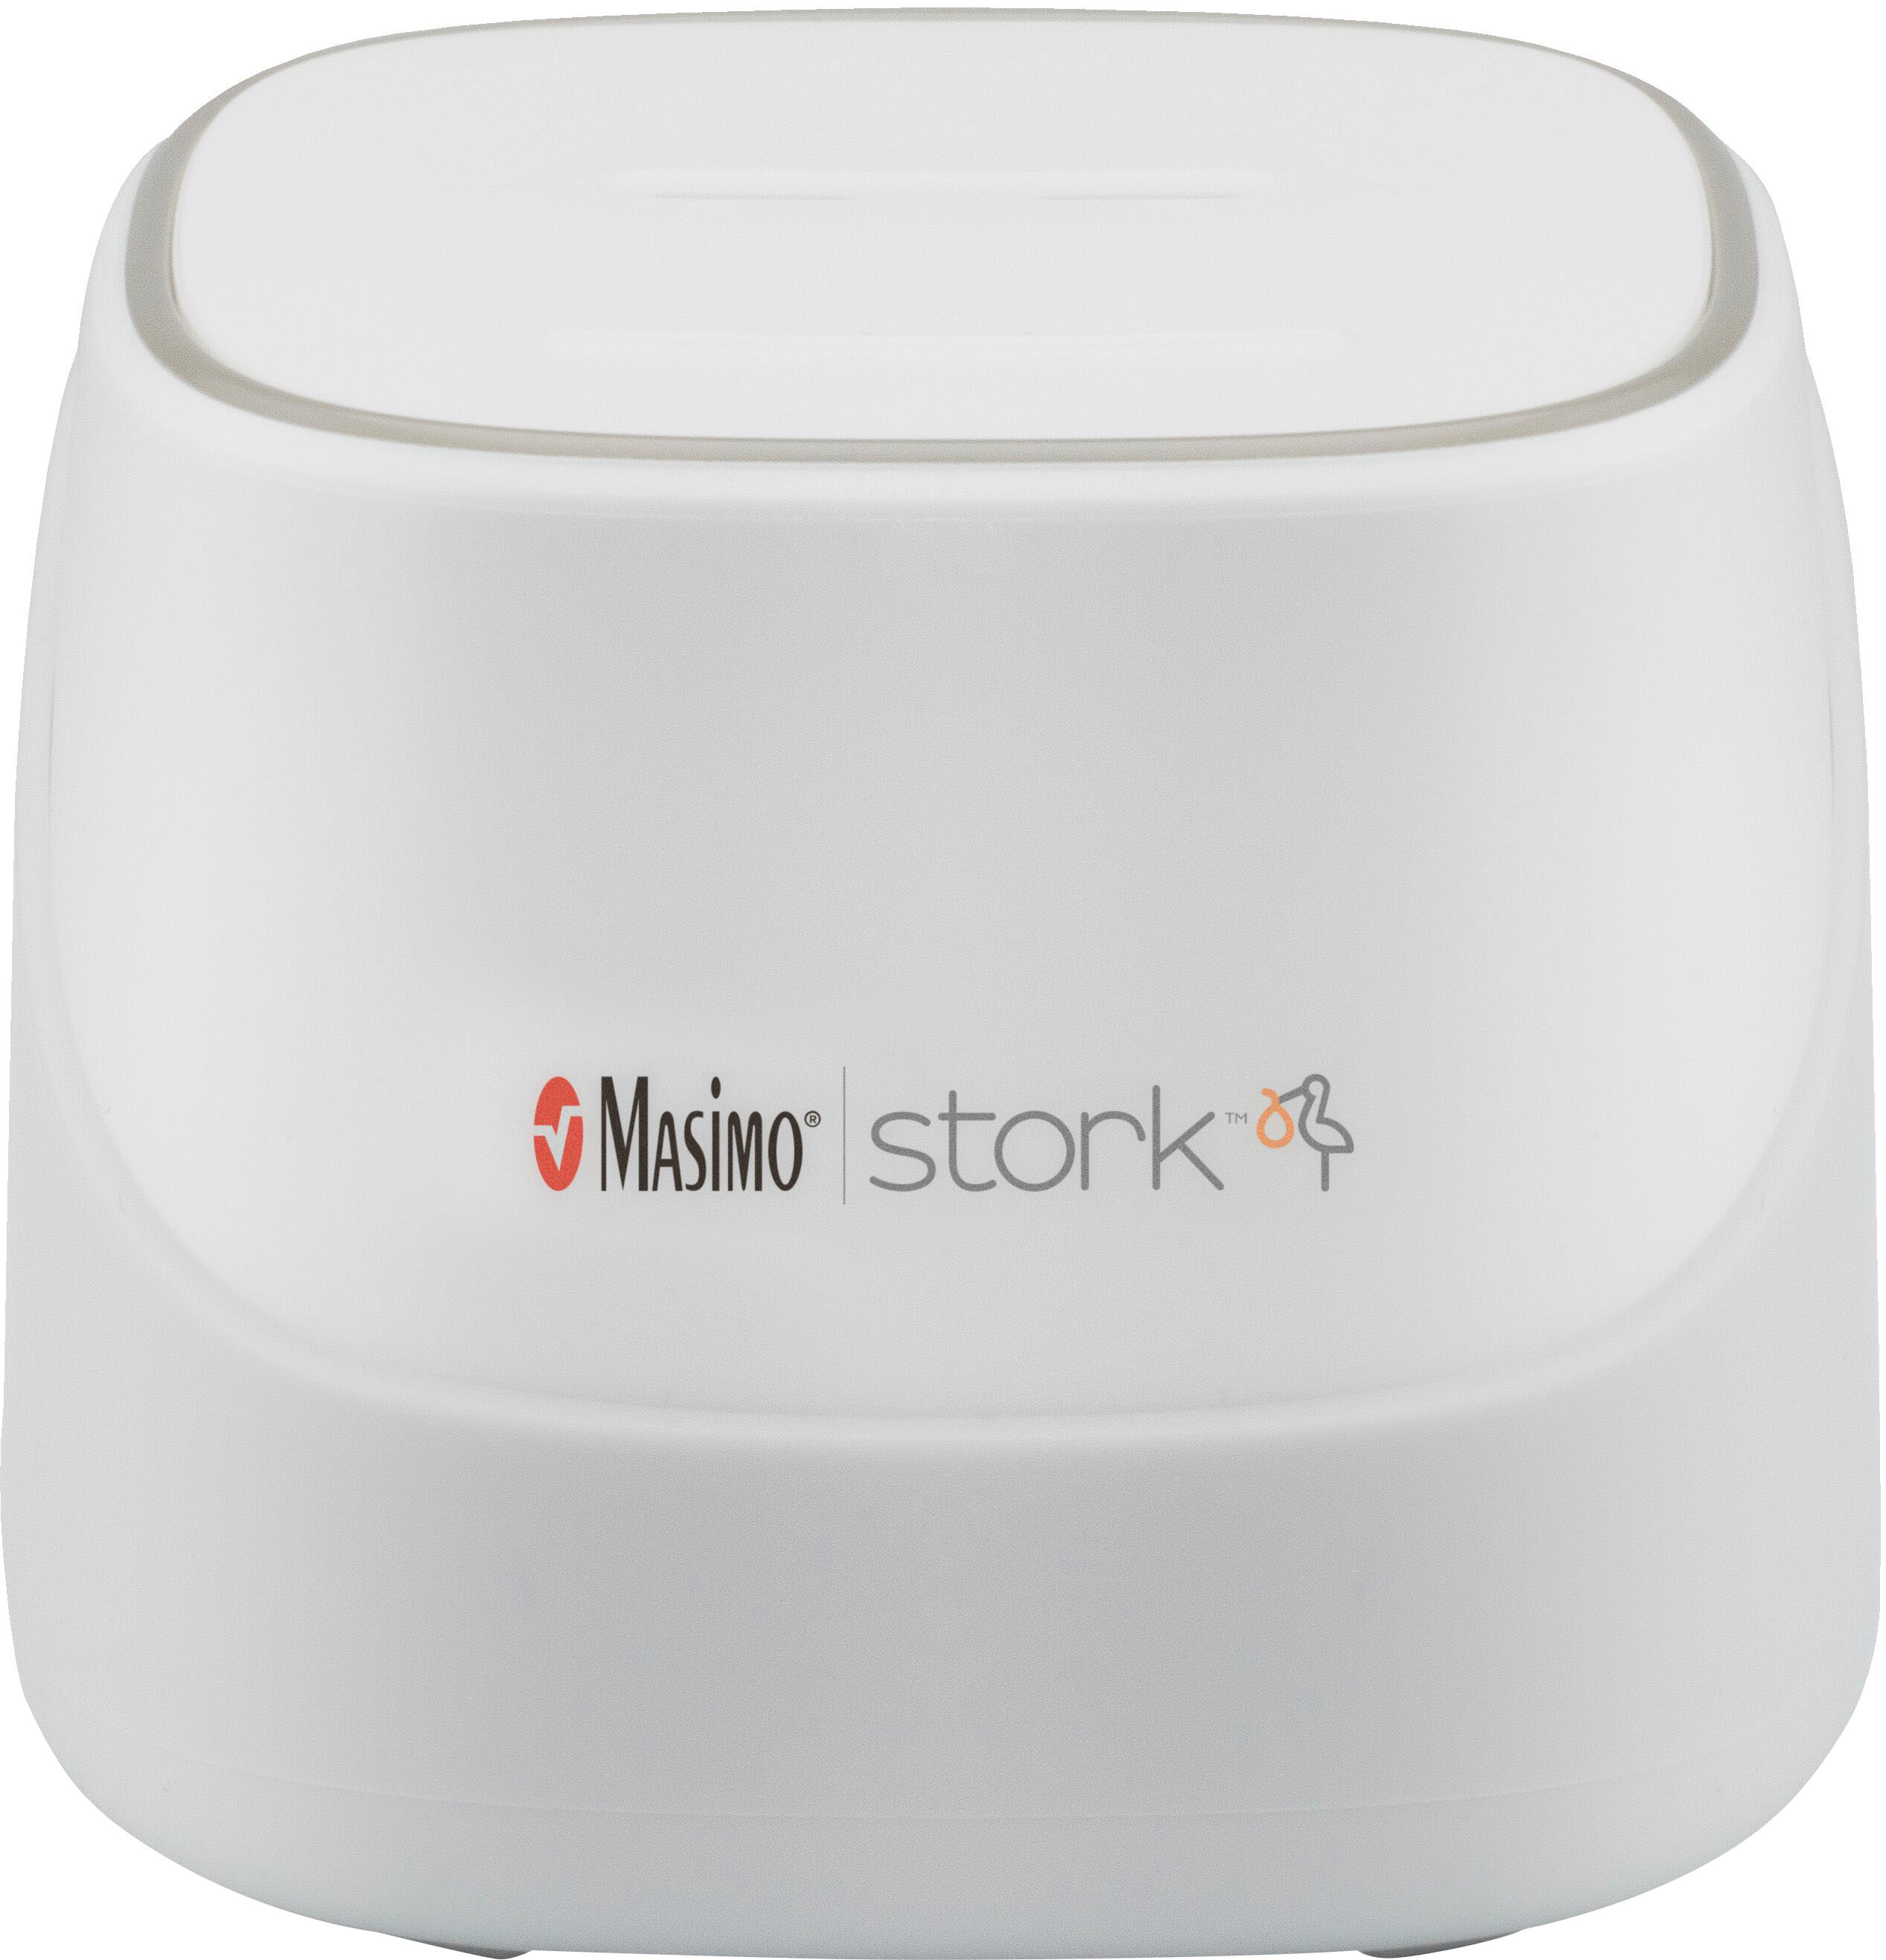 Angle View: Masimo - Stork Vitals Baby Monitoring System with Smart Hub and Boot with Built-in Blood Oxygen and Pulse Rate Sensor - White